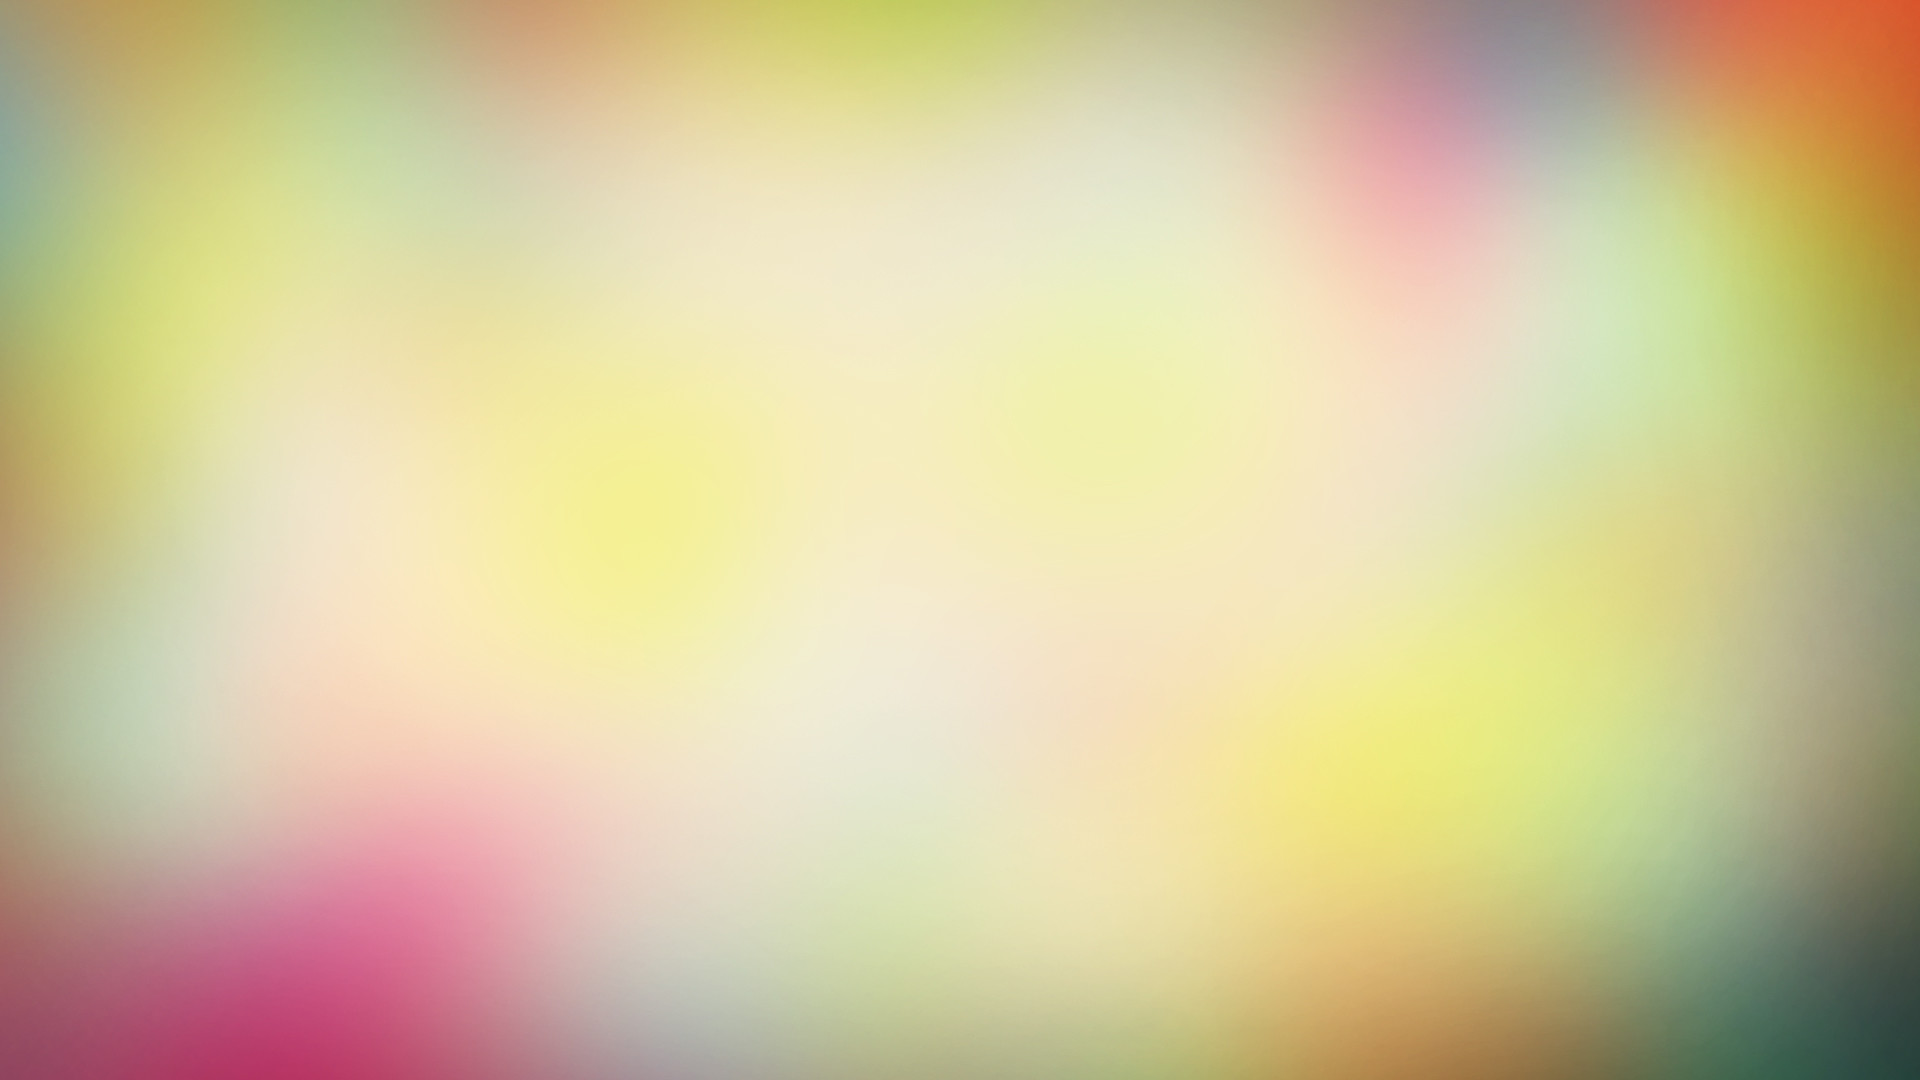 1920x1080 Pin Smoothly Pastel Color Minimalist Wallpaper Abstract Wallpapers .